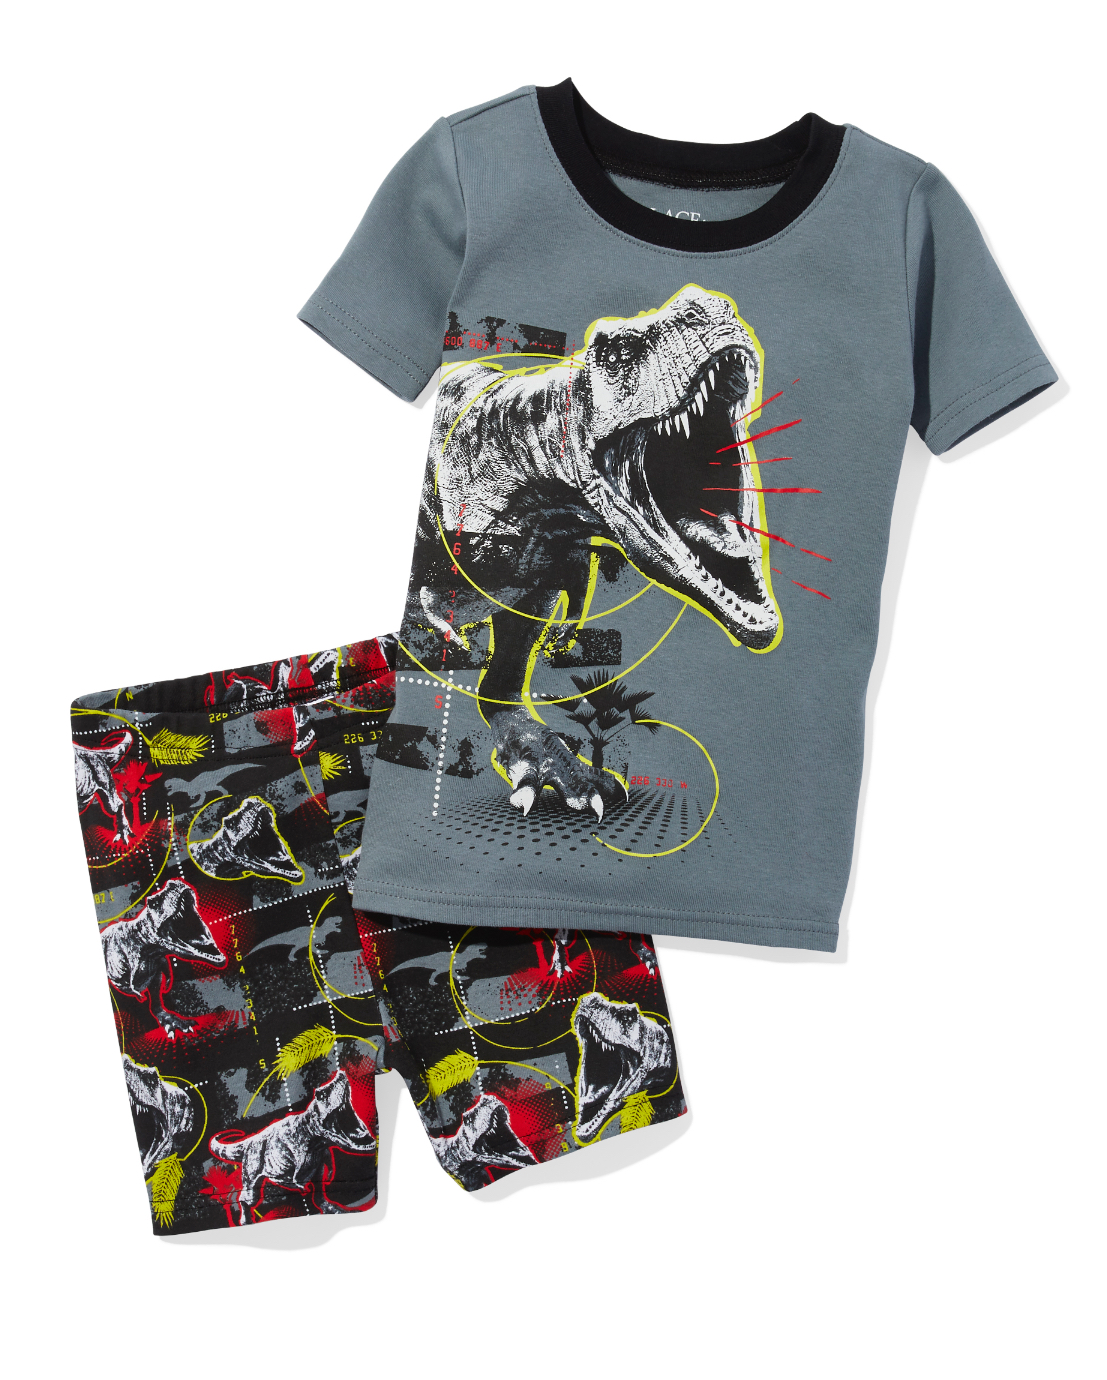 Boys Clothing | The Children's Place | Free Shipping*